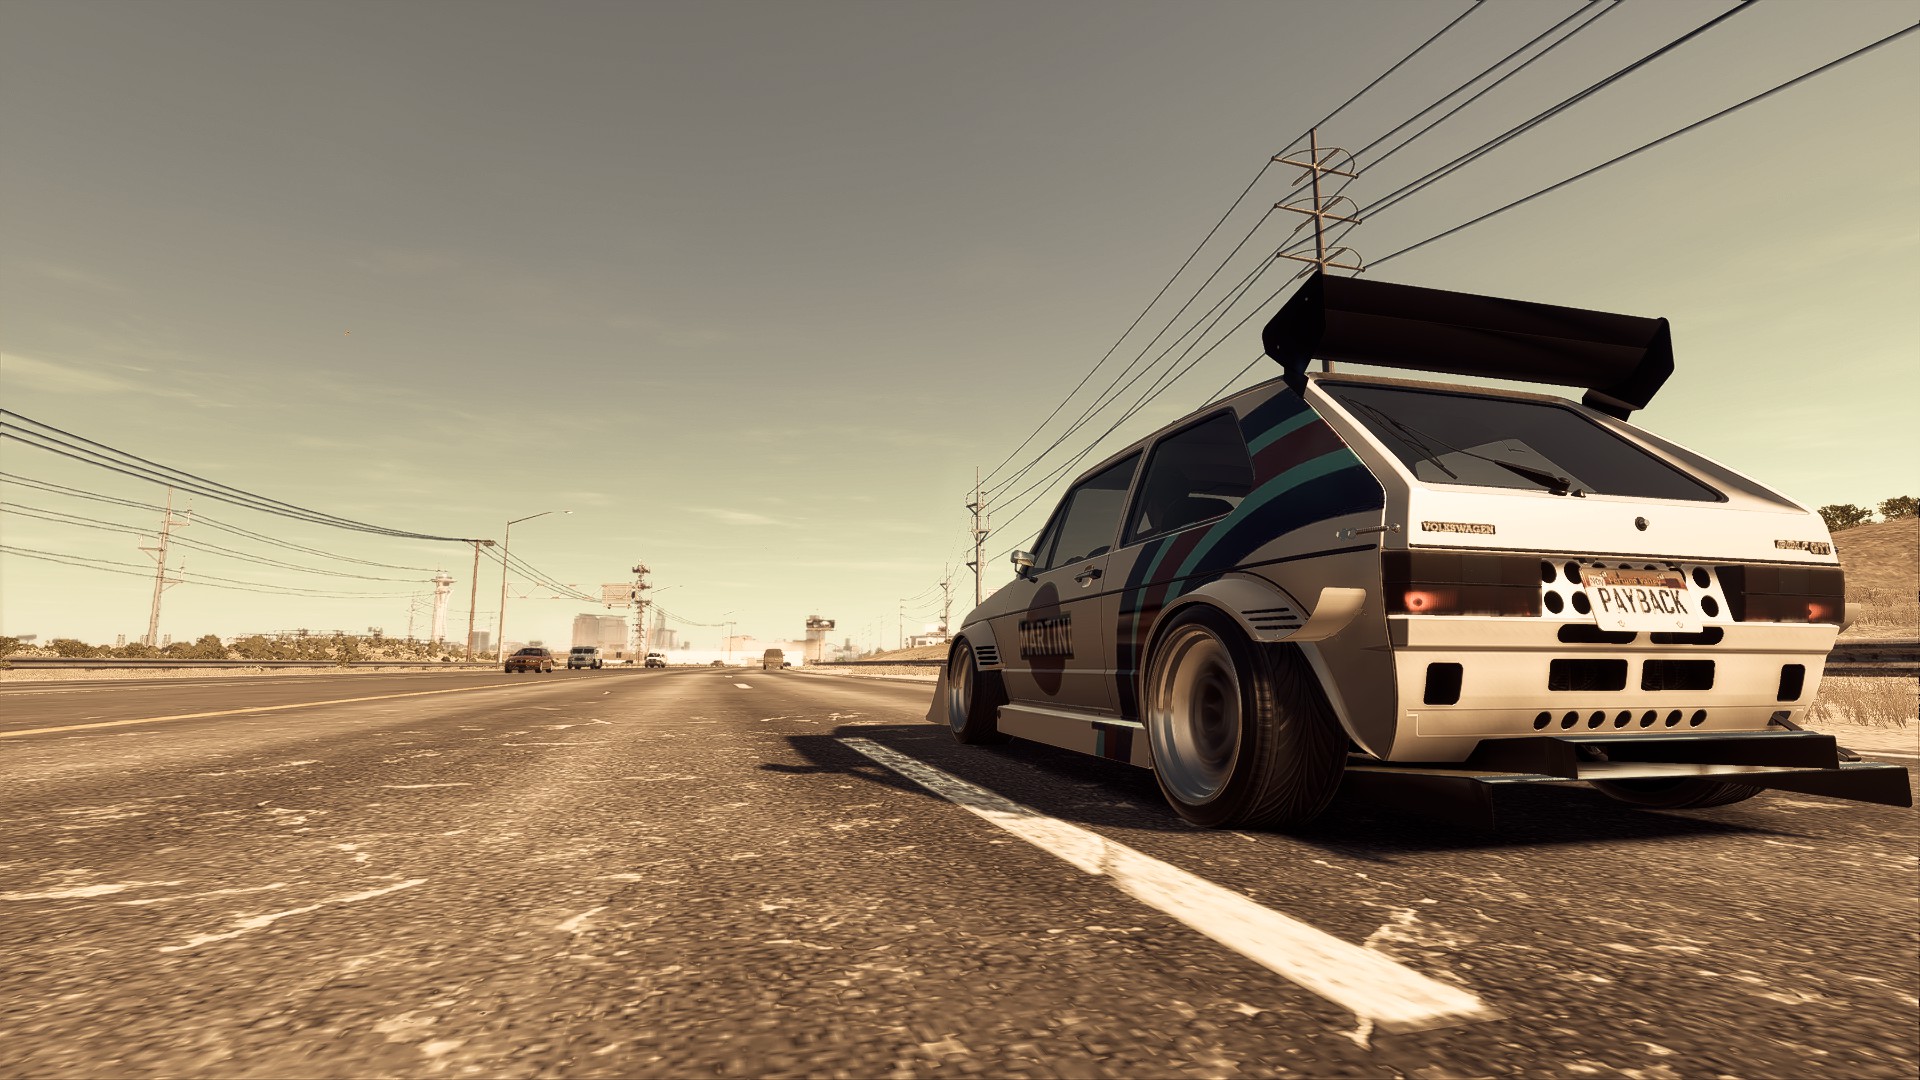 Volkswagen Golf Mk1 Need For Speed Need For Speed Payback Volkswagen Golf Volkswagen 1920x1080